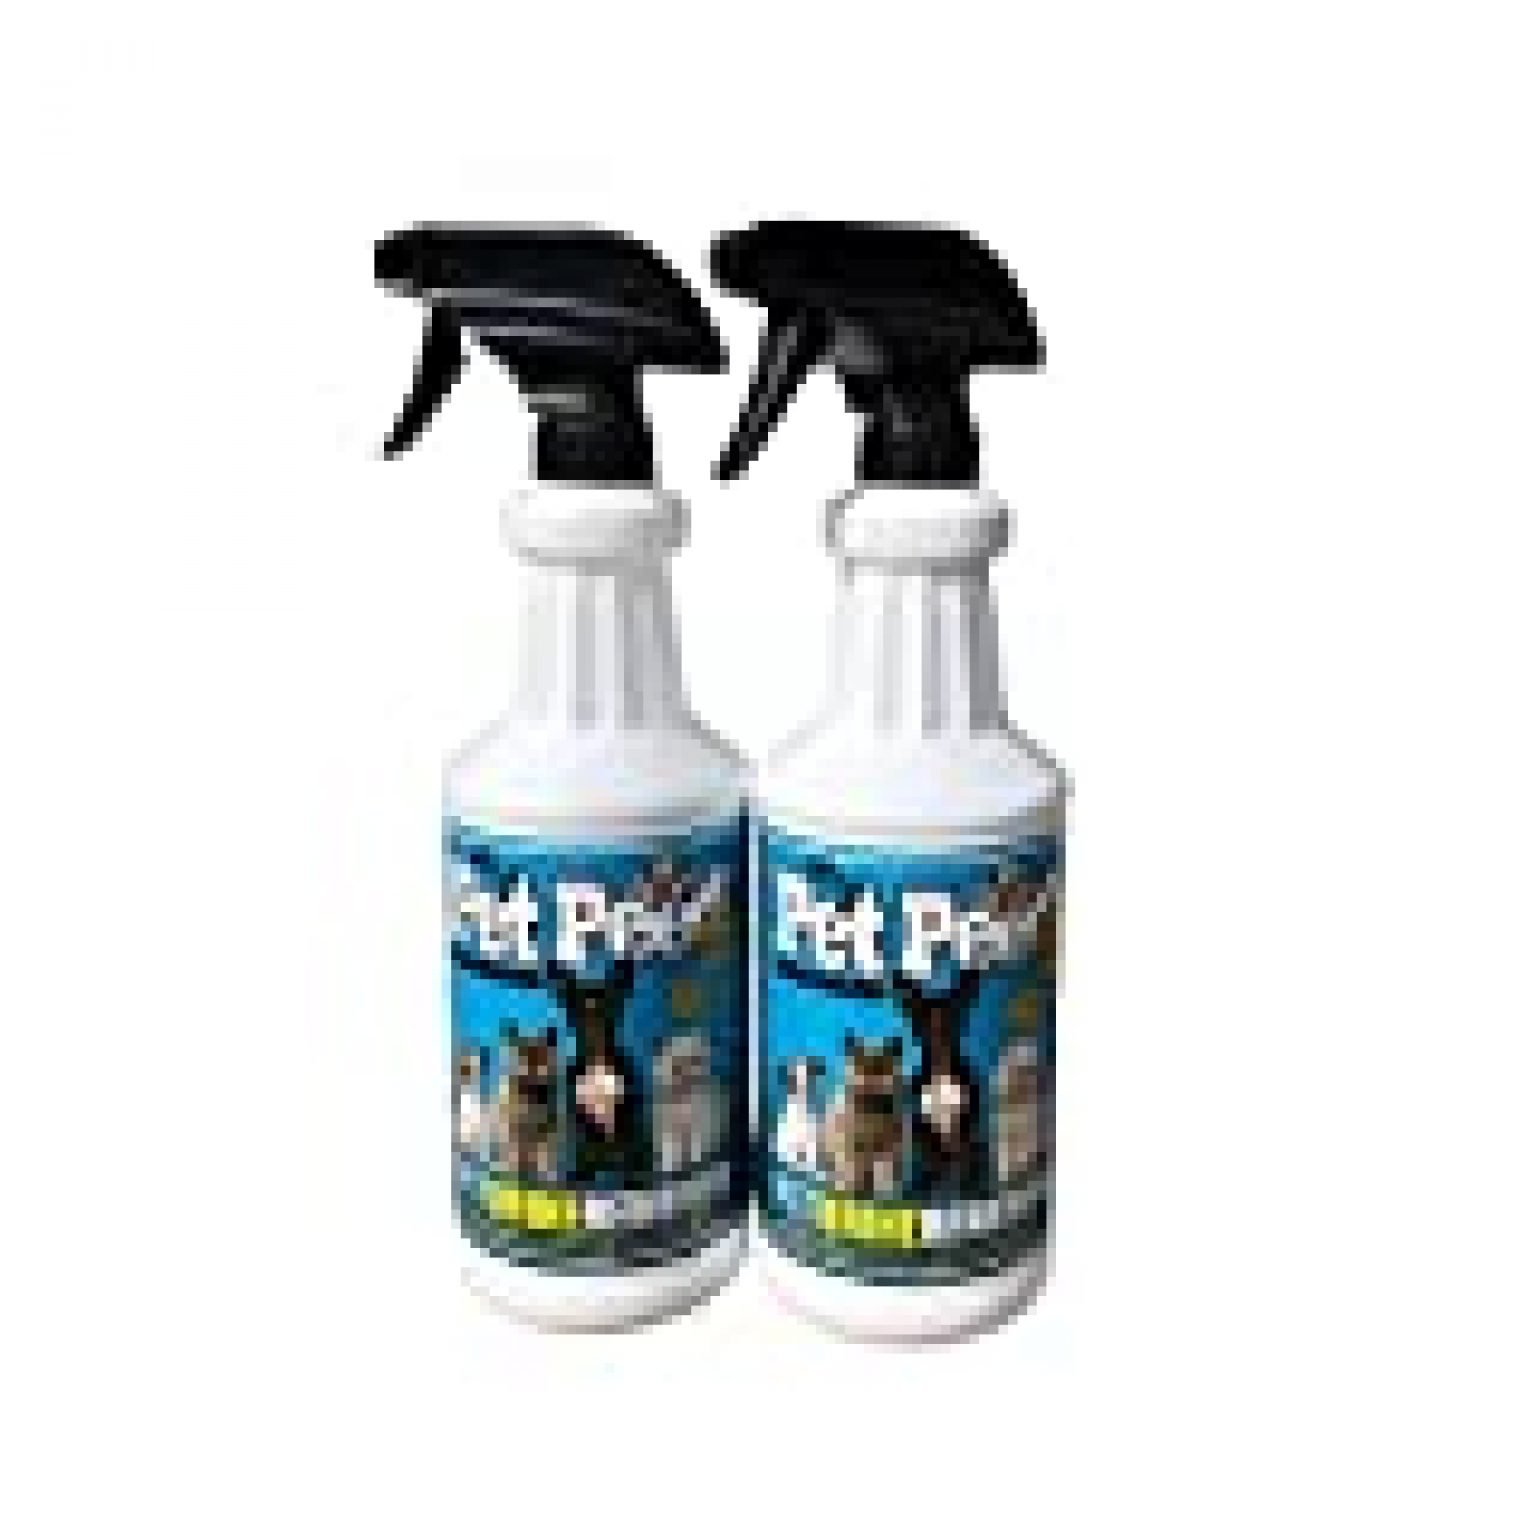 My Pet Peed Pet Stain & Odor Remover (Two Pack 32oz Spray Bottles